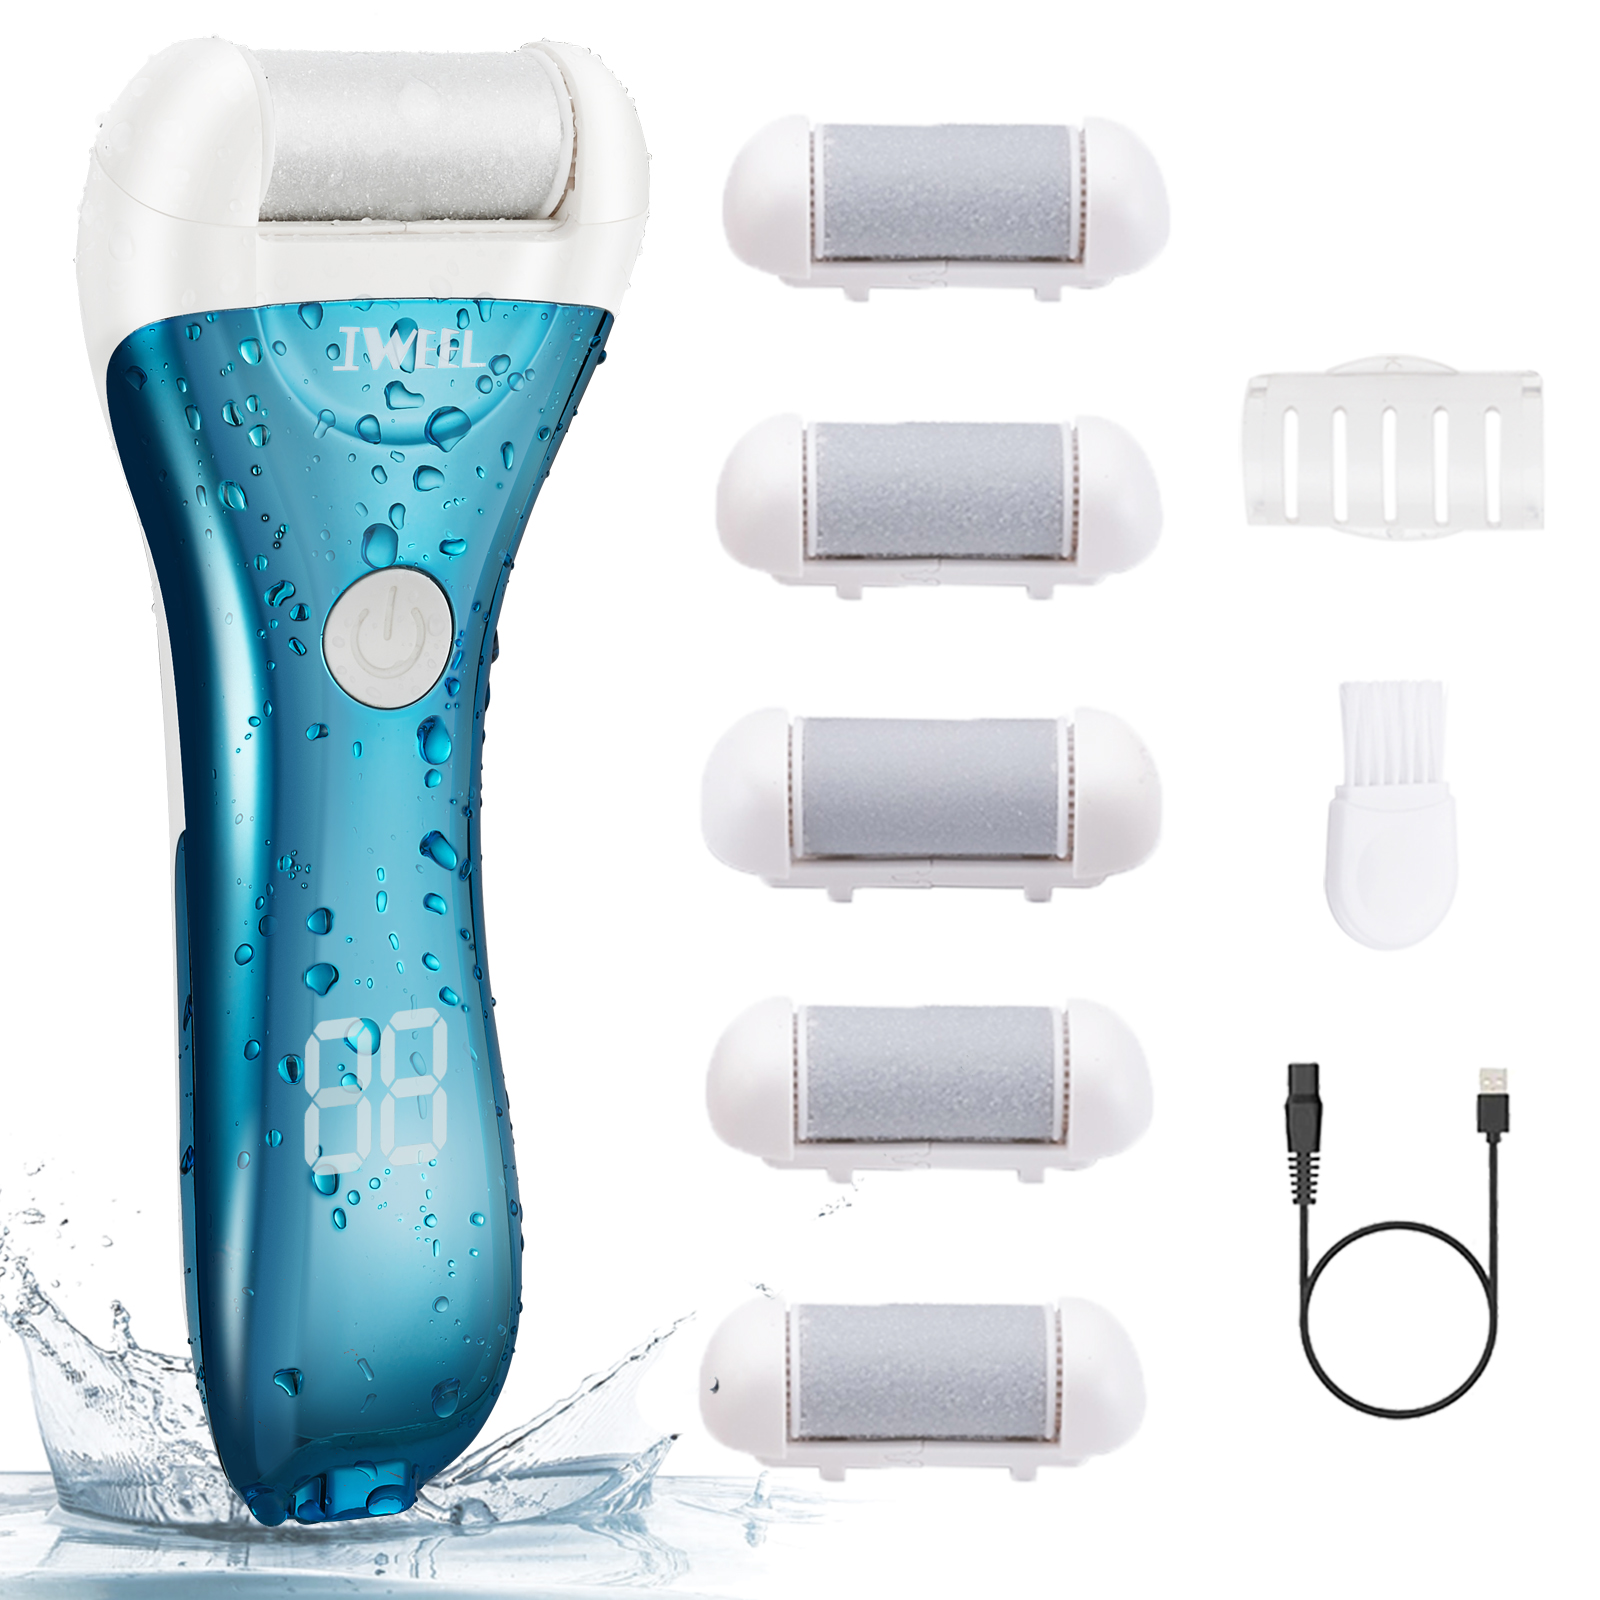 Callus Remover for Feet, Electric Foot File Rechargeable Foot Scrubber Pedicure Tools for Feet Electronic Callus Shaver Waterproof Pedicure kit for Cracked Heels and Dead Skin with 5 Roller Heads - image 1 of 7